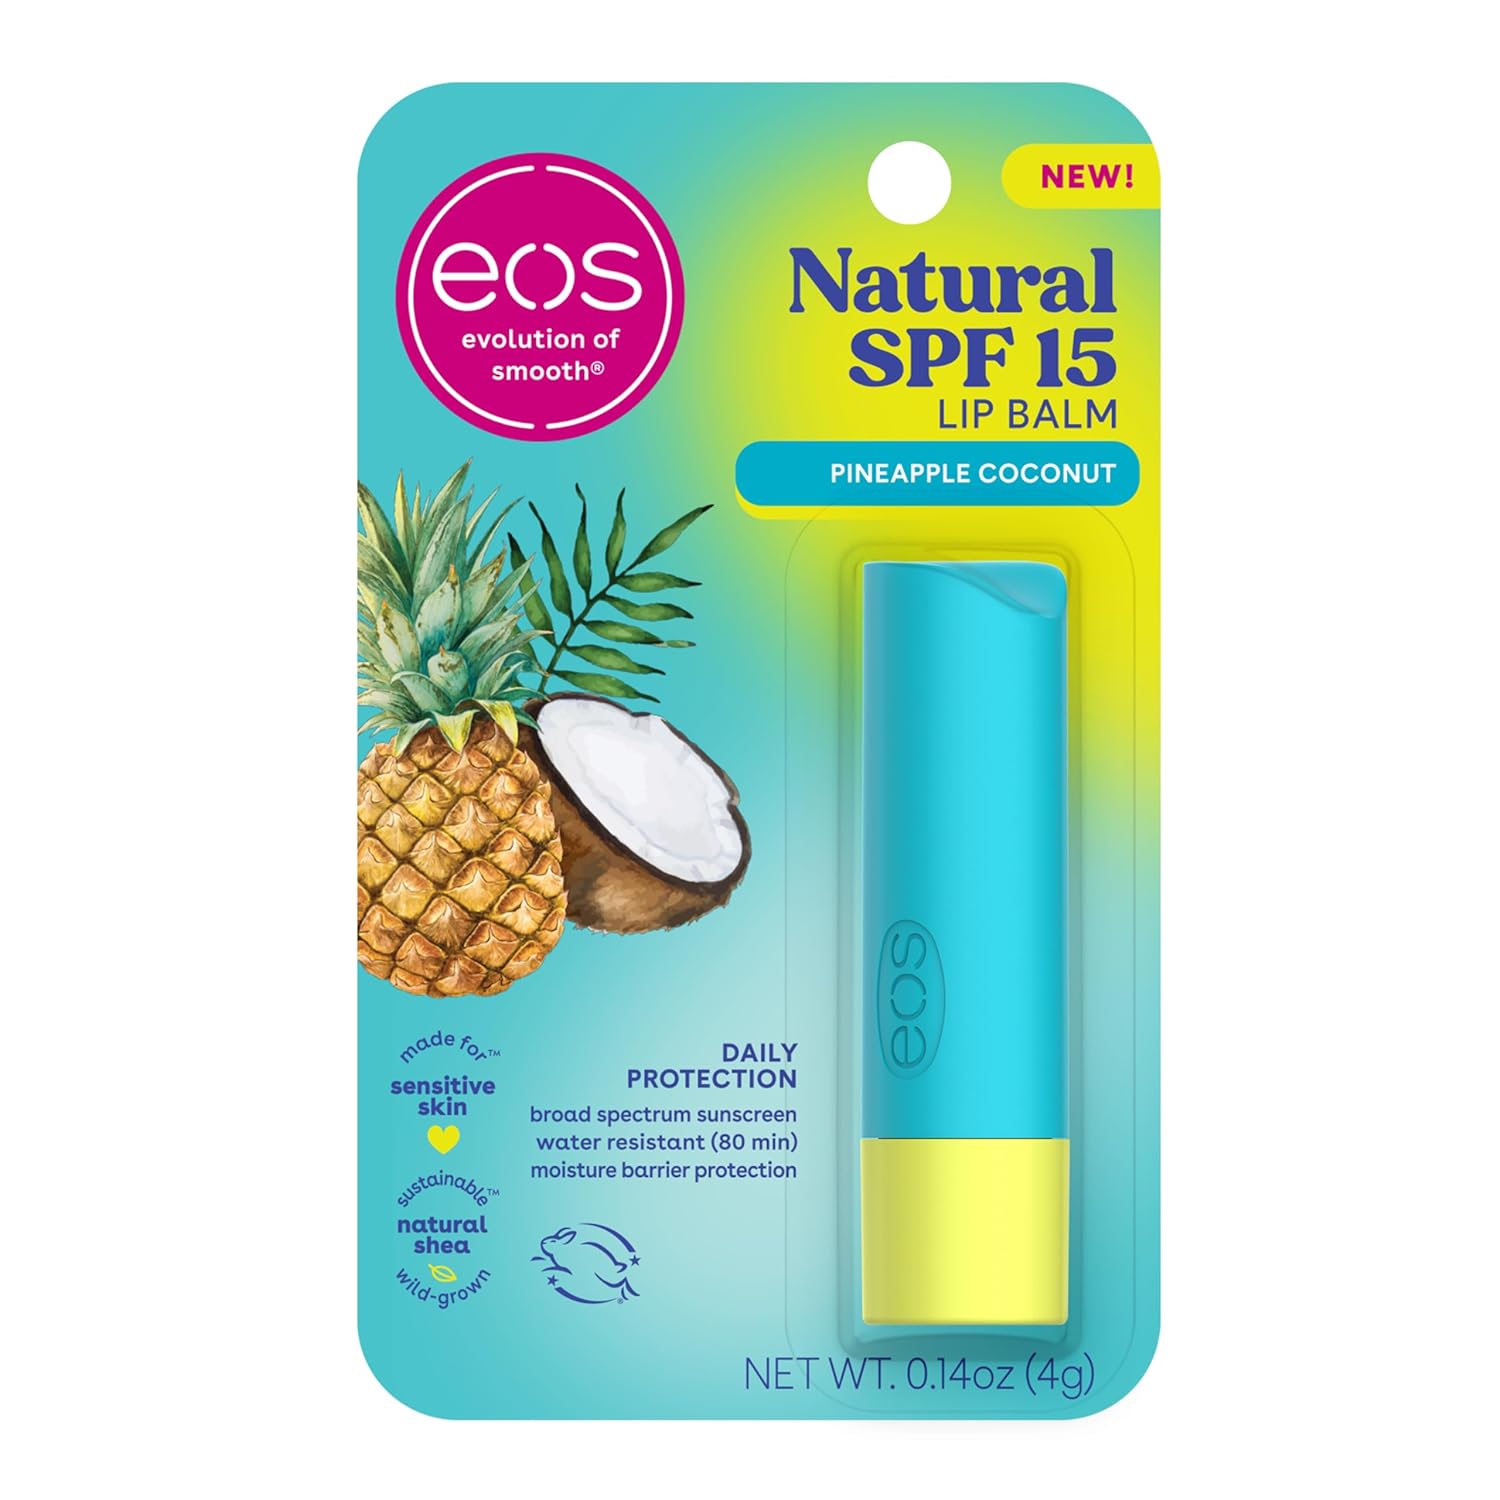 eos Natural SPF 15 Lip Balm- Pineapple Coconut, Daily Protection, Water Resistant, 0.14 oz